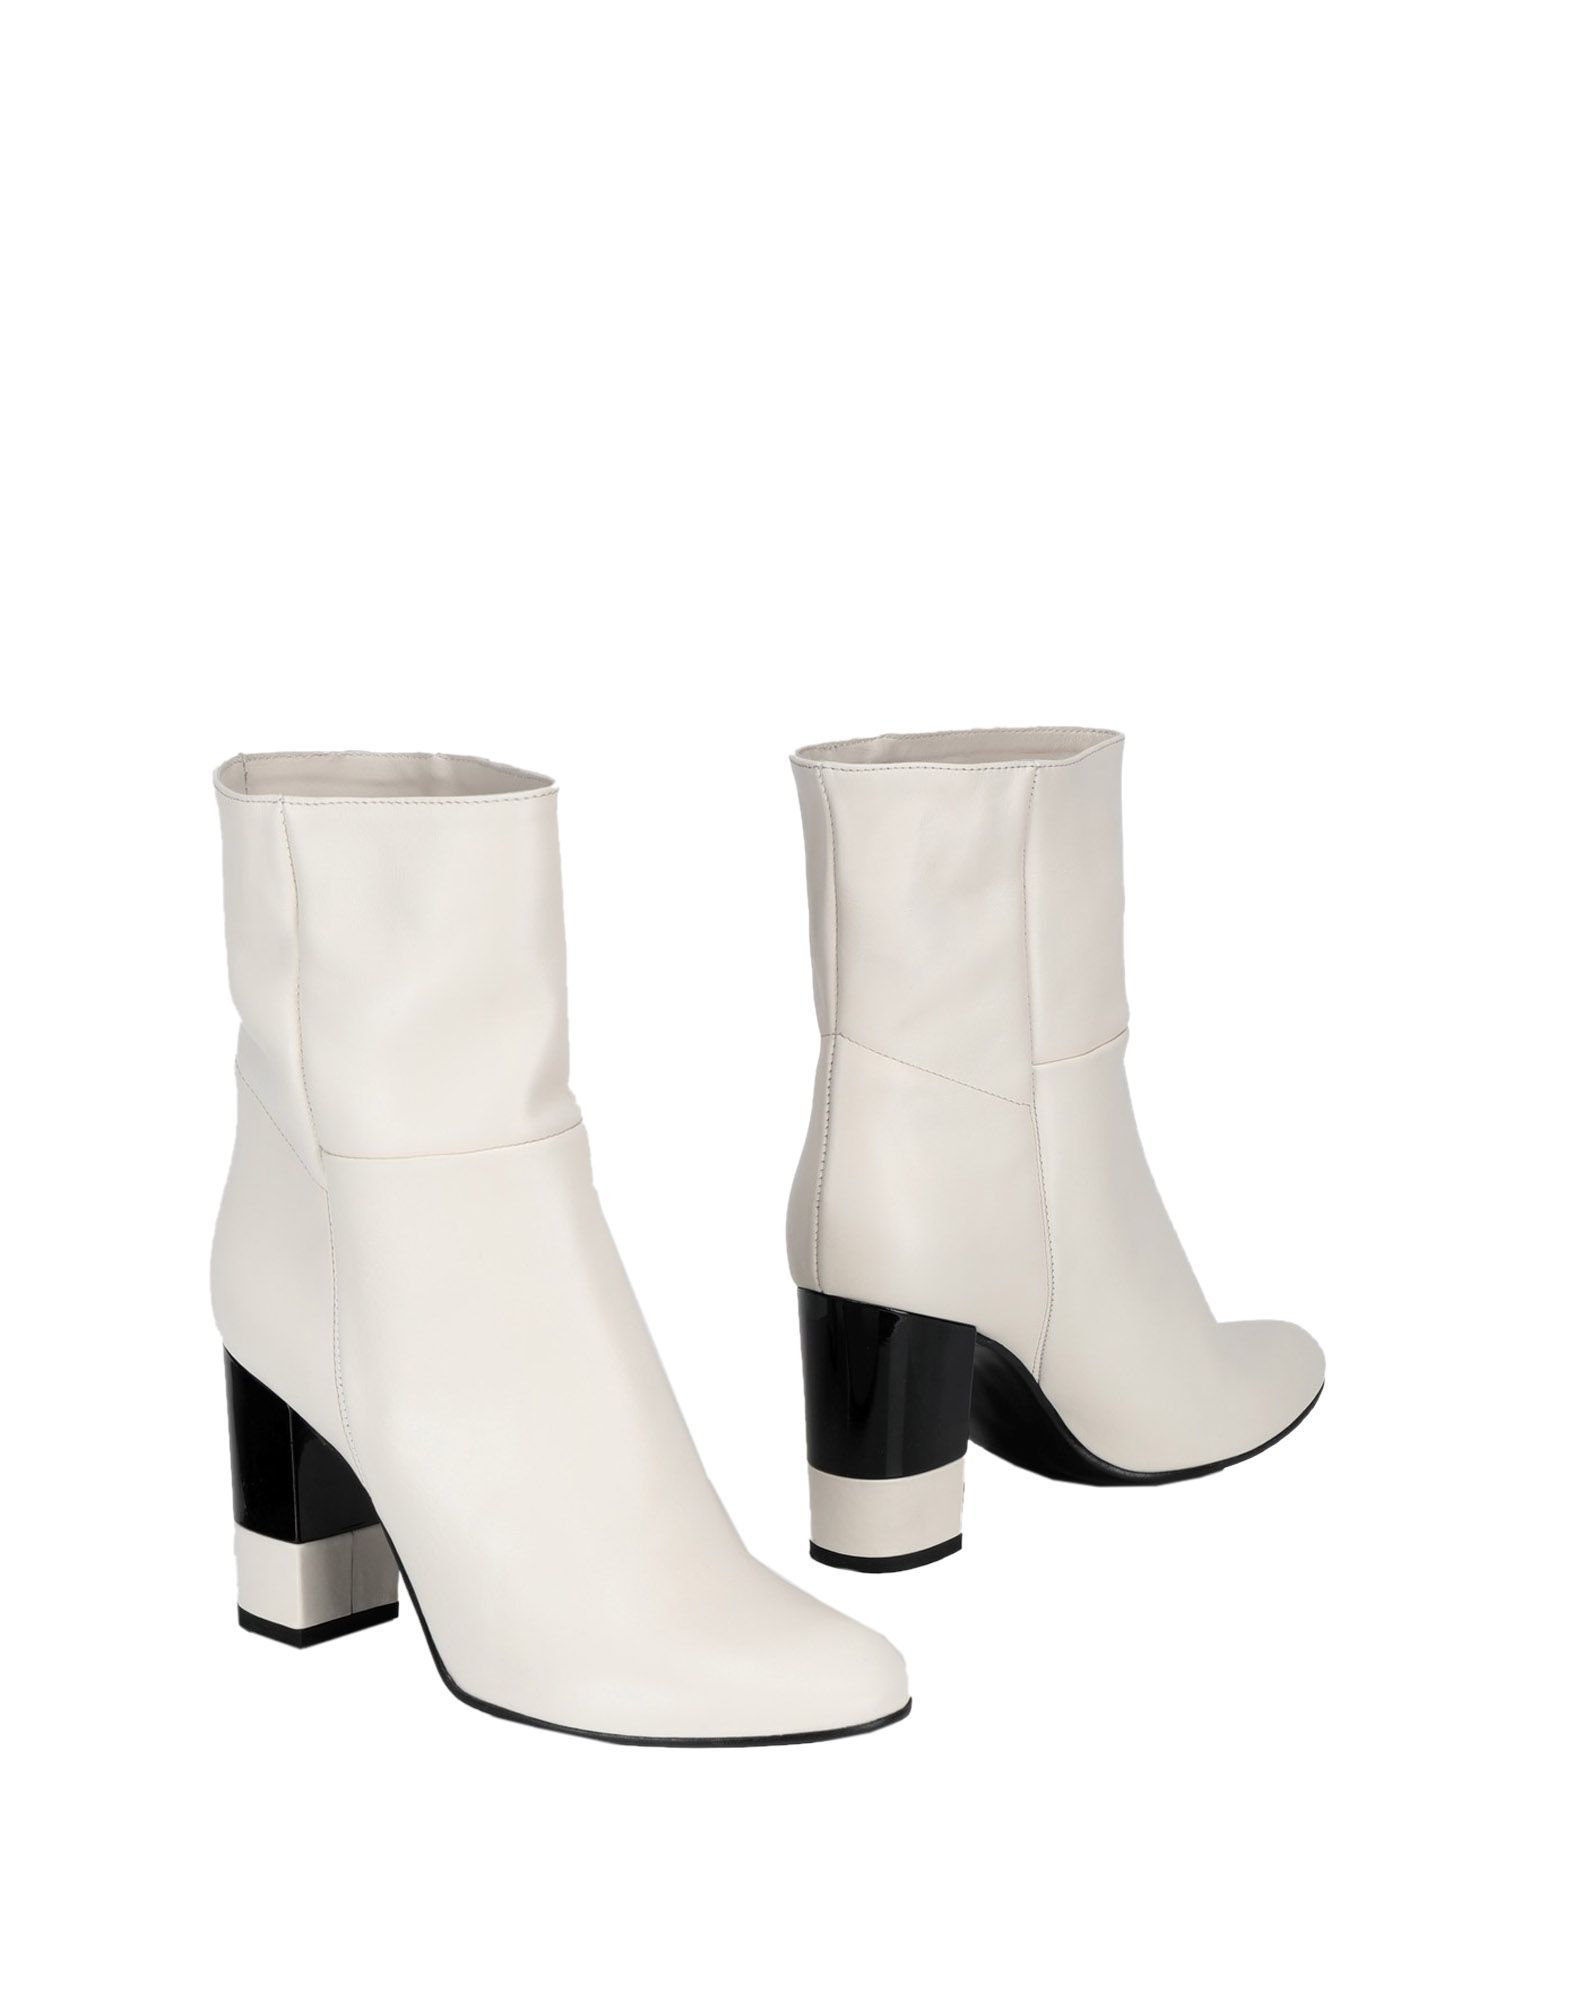 ACCADEMIA Ankle boots | YOOX (US)